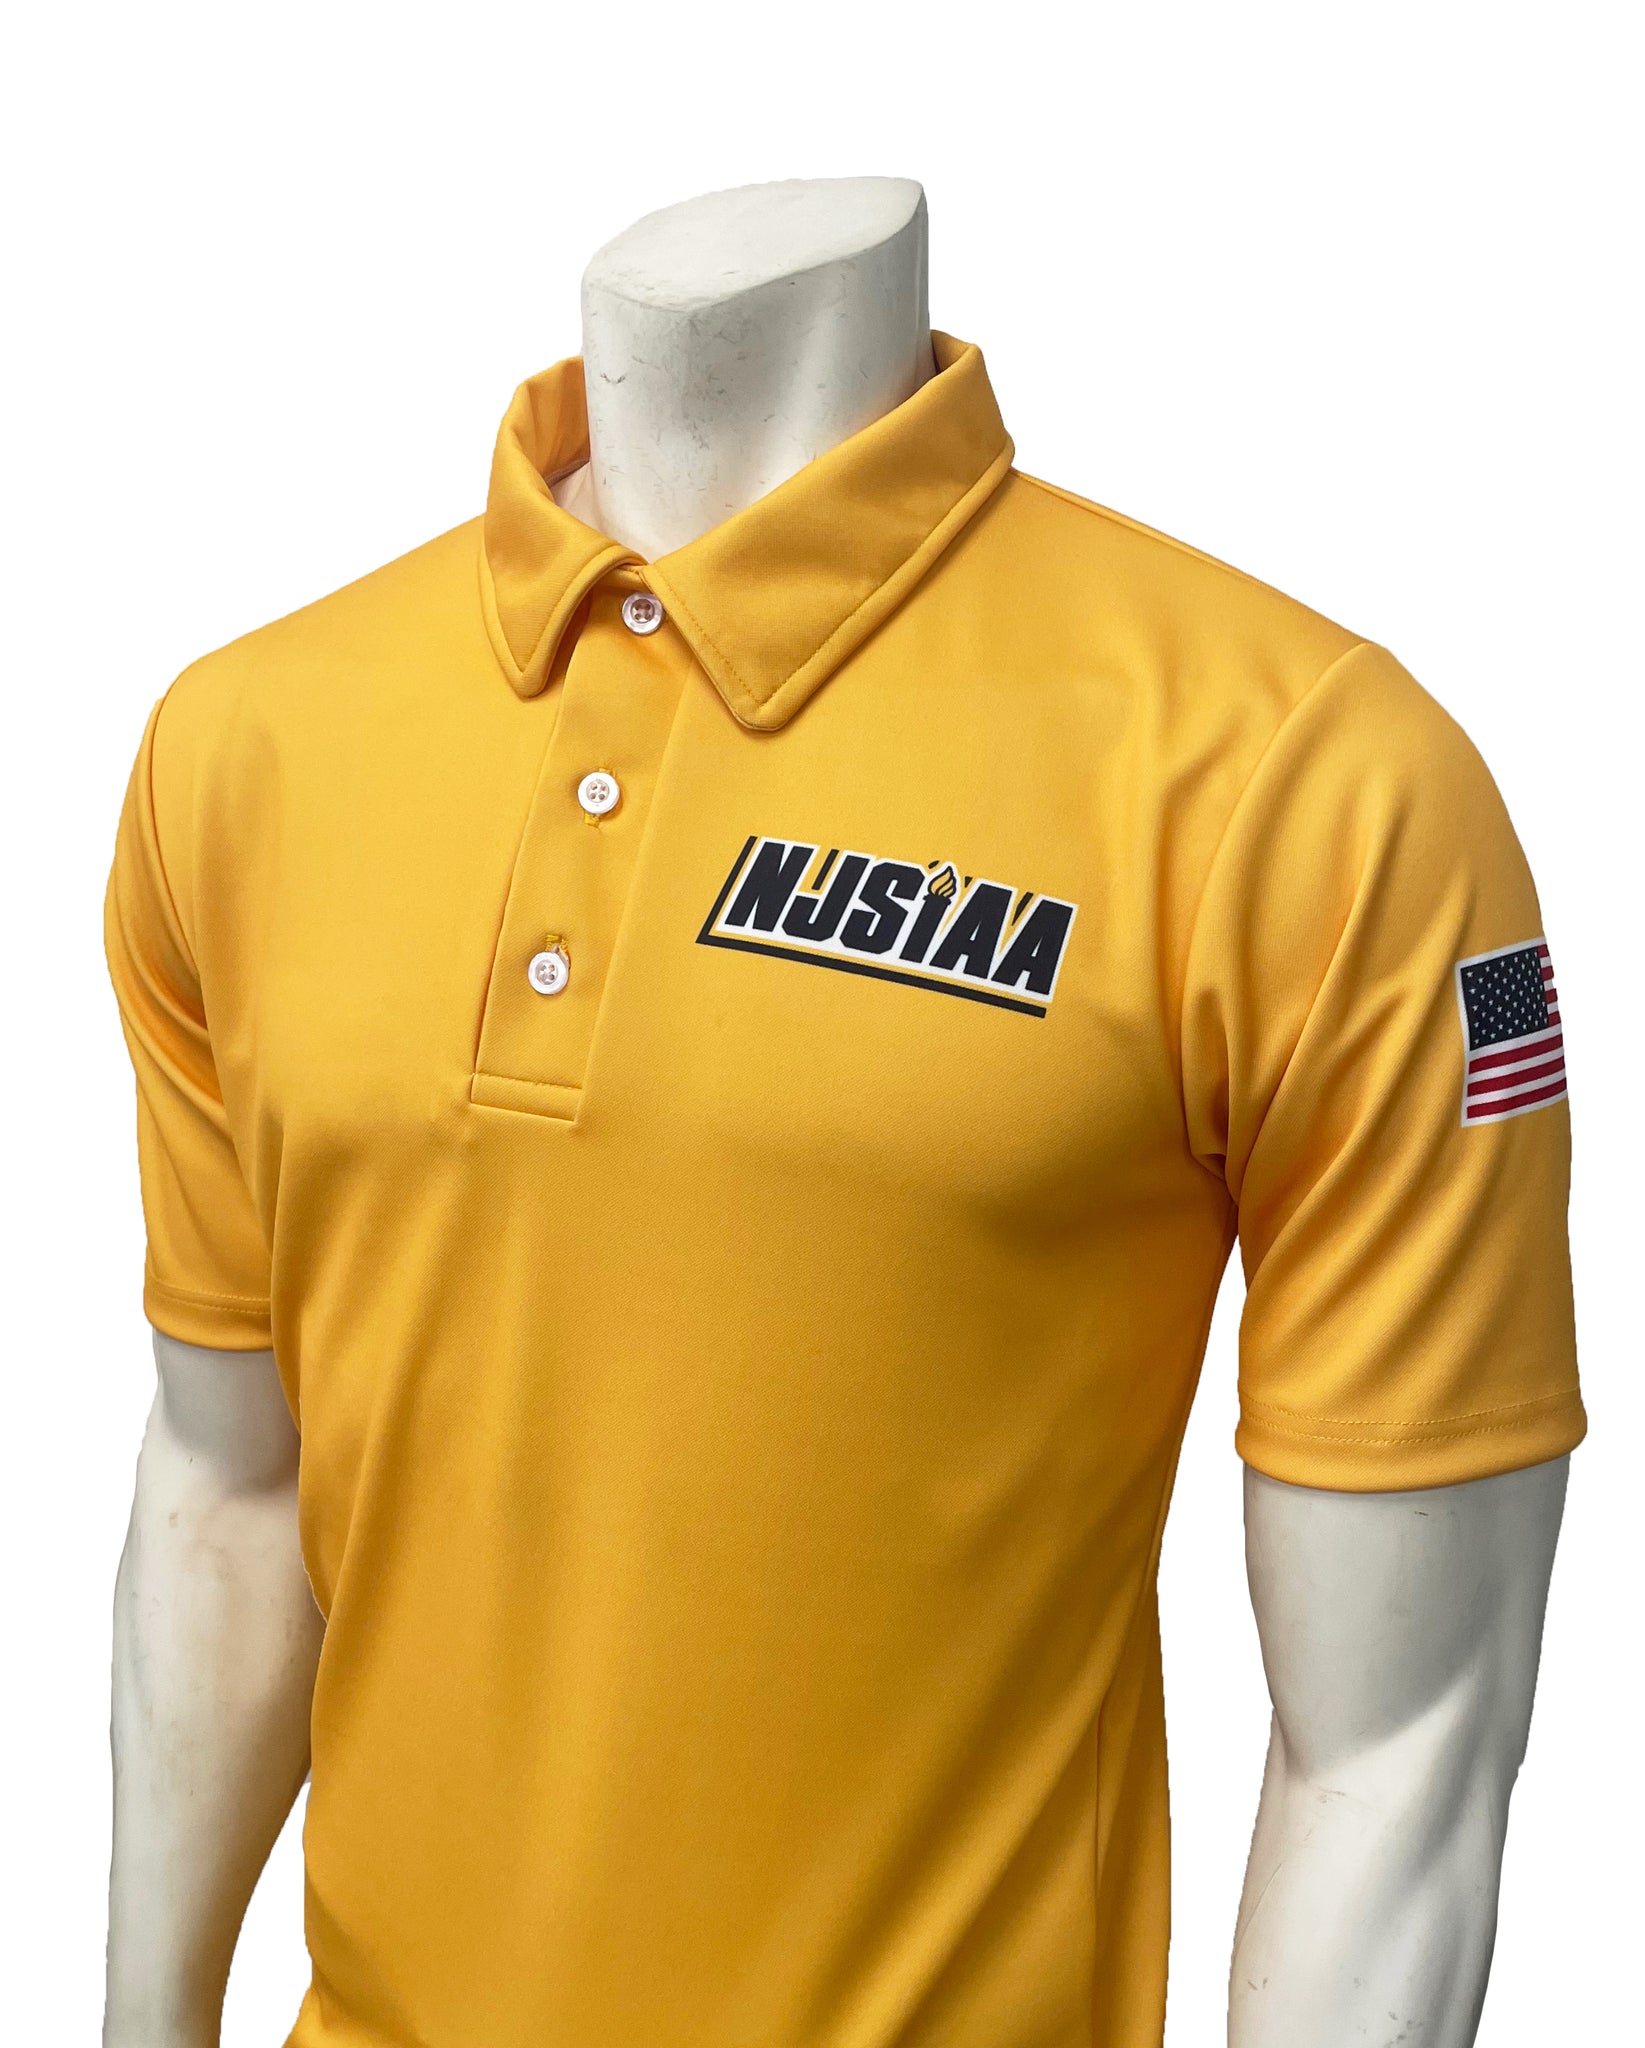 USA400NJ-GLD - Smitty "Made in USA" - NJSIAA Men's Cross Country and Track Short Sleeve Shirt